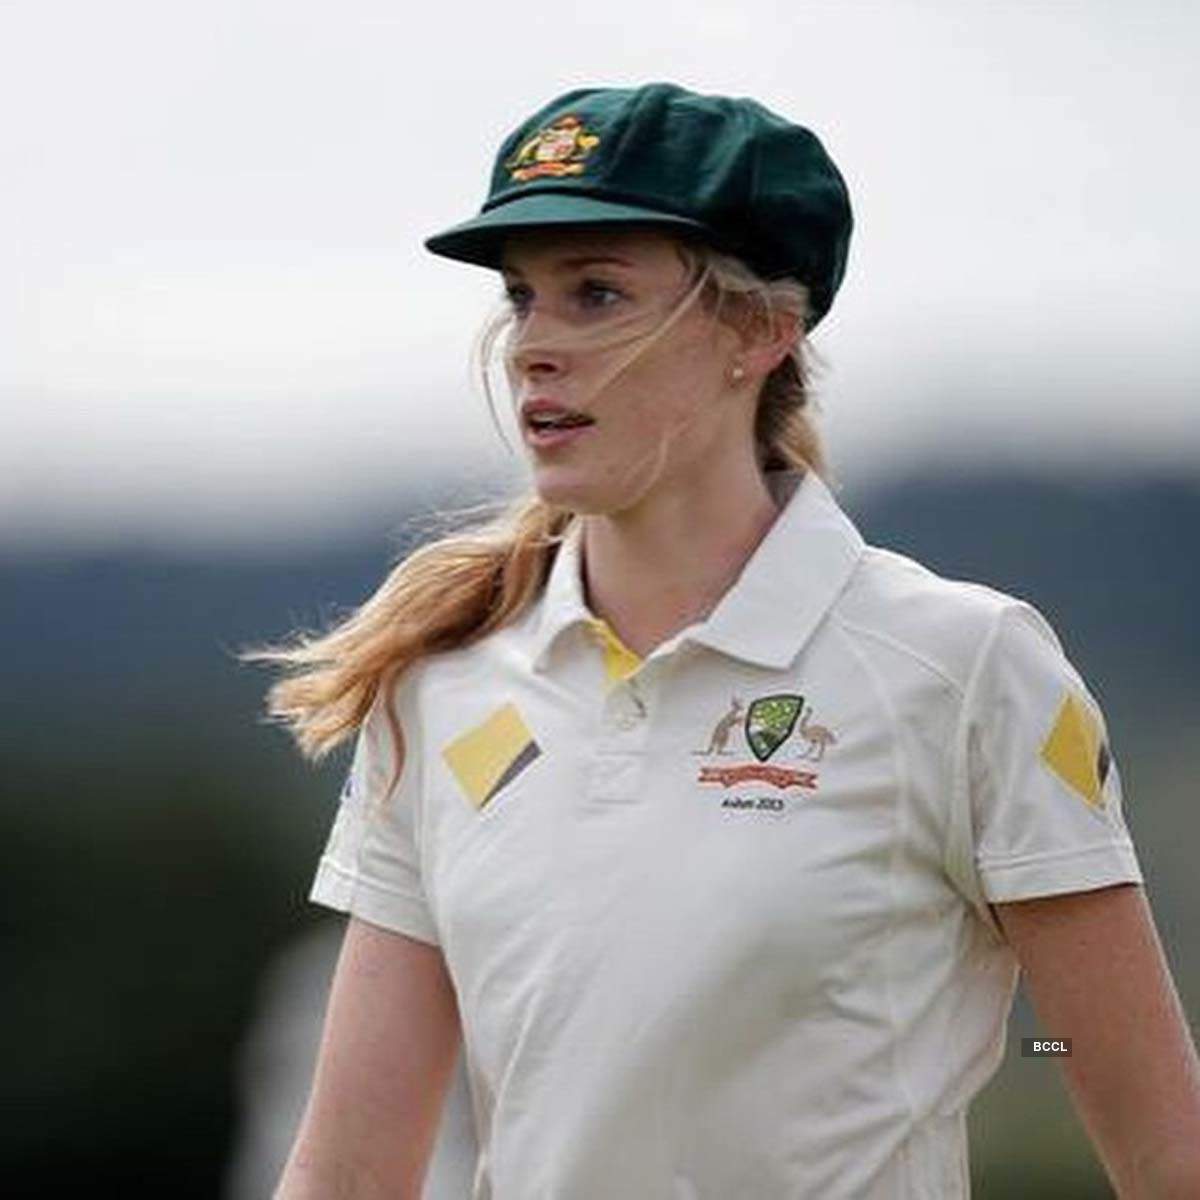 Stunning pictures of the multi-skilled Australian cricketer Holly Ferling